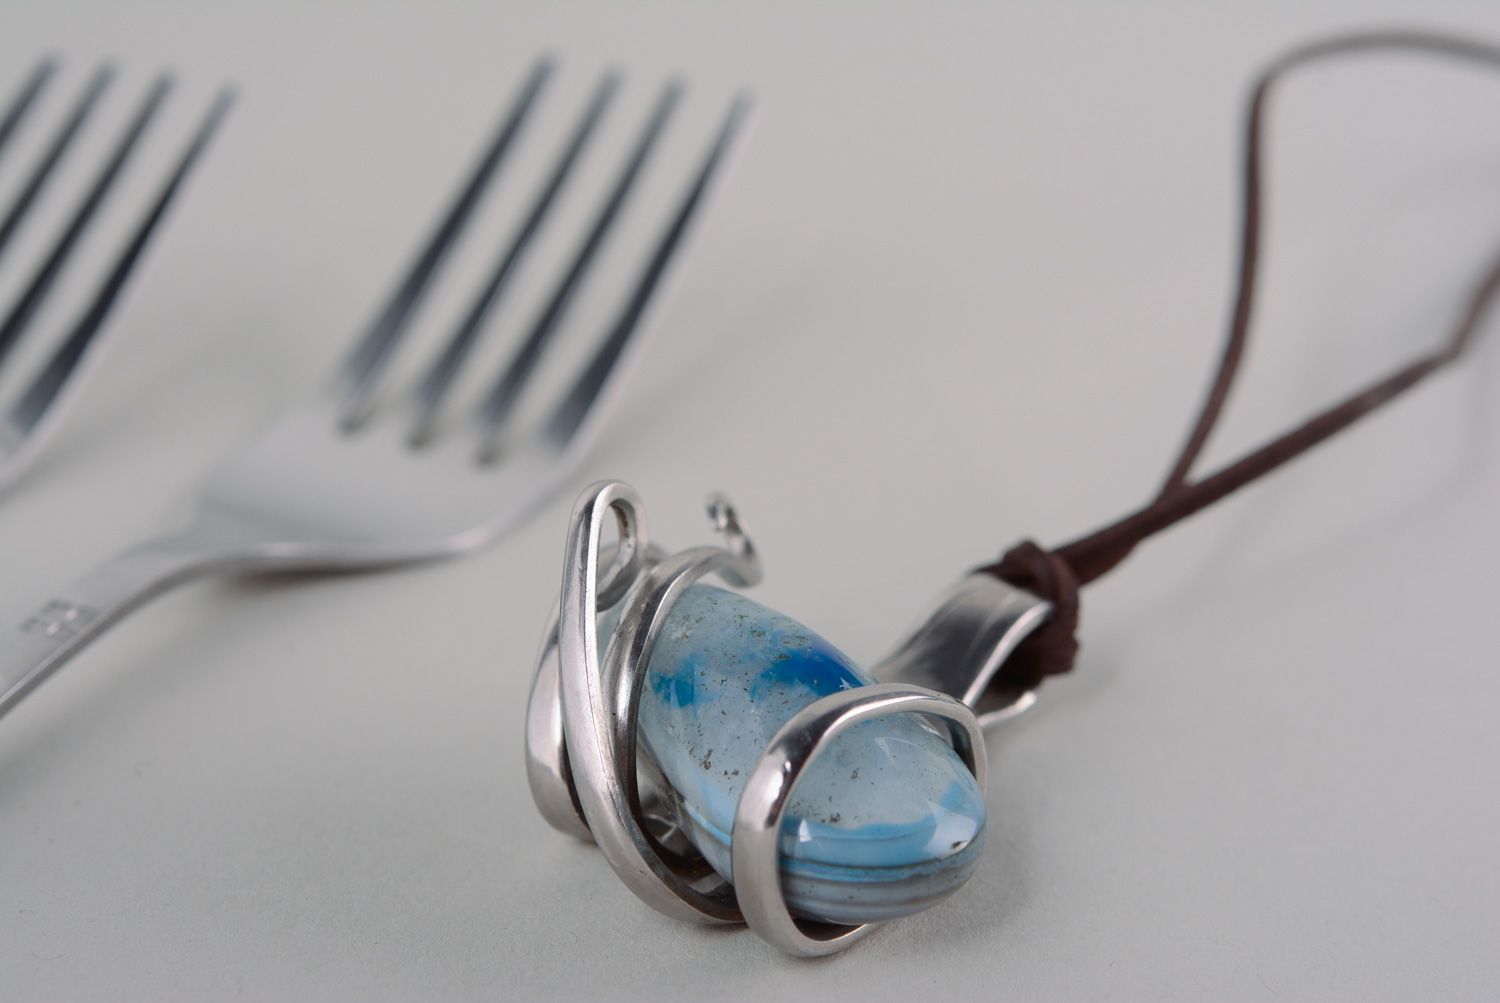 Homemade metal pendant made of cupronickel fork with blue stone photo 1